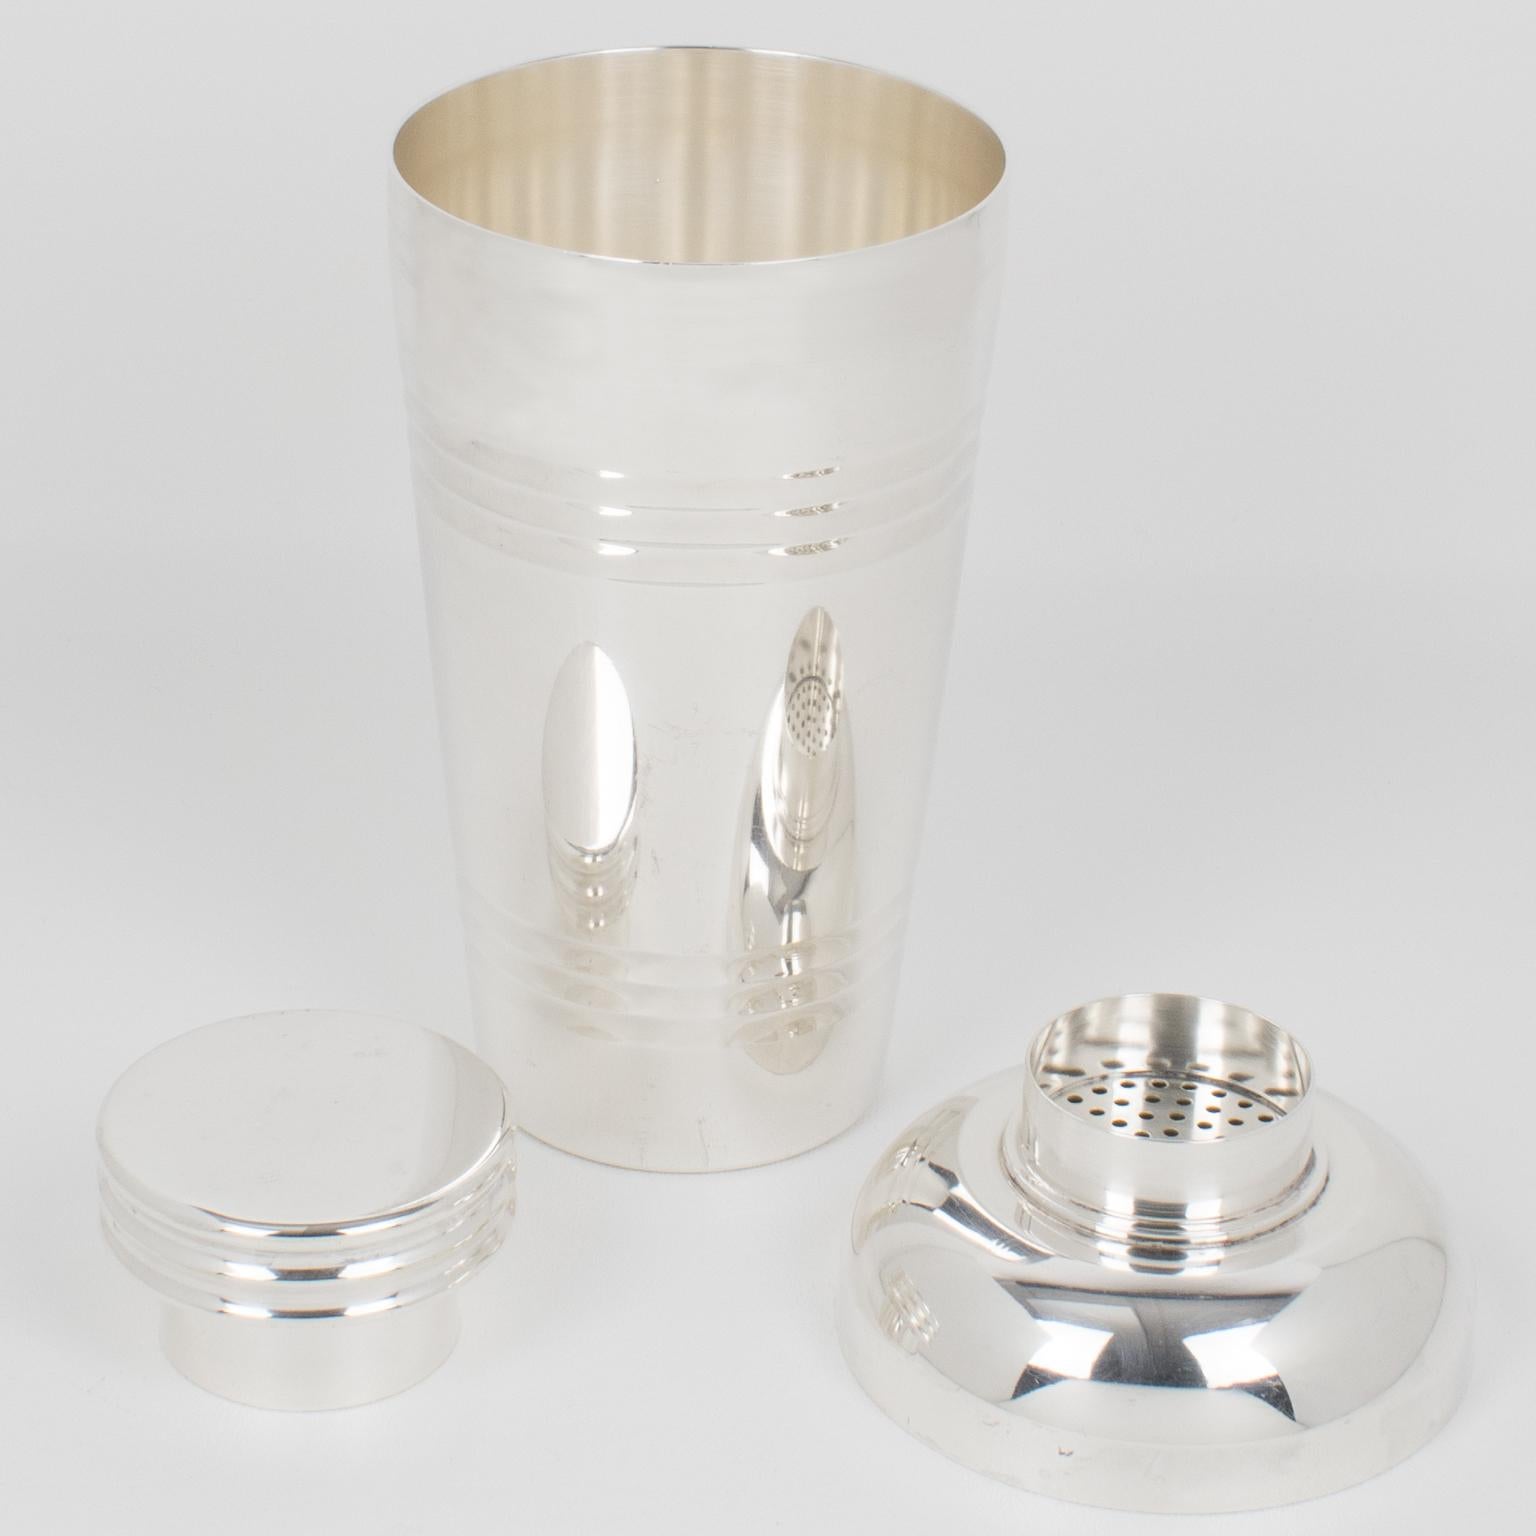 This sophisticated three-sectioned cocktail shaker was crafted by the renowned silversmith Saint Medard in Paris in the 1940s. The beautiful Art Deco design features a geometric pattern and is adorned with a removable cap and strainer. The underside